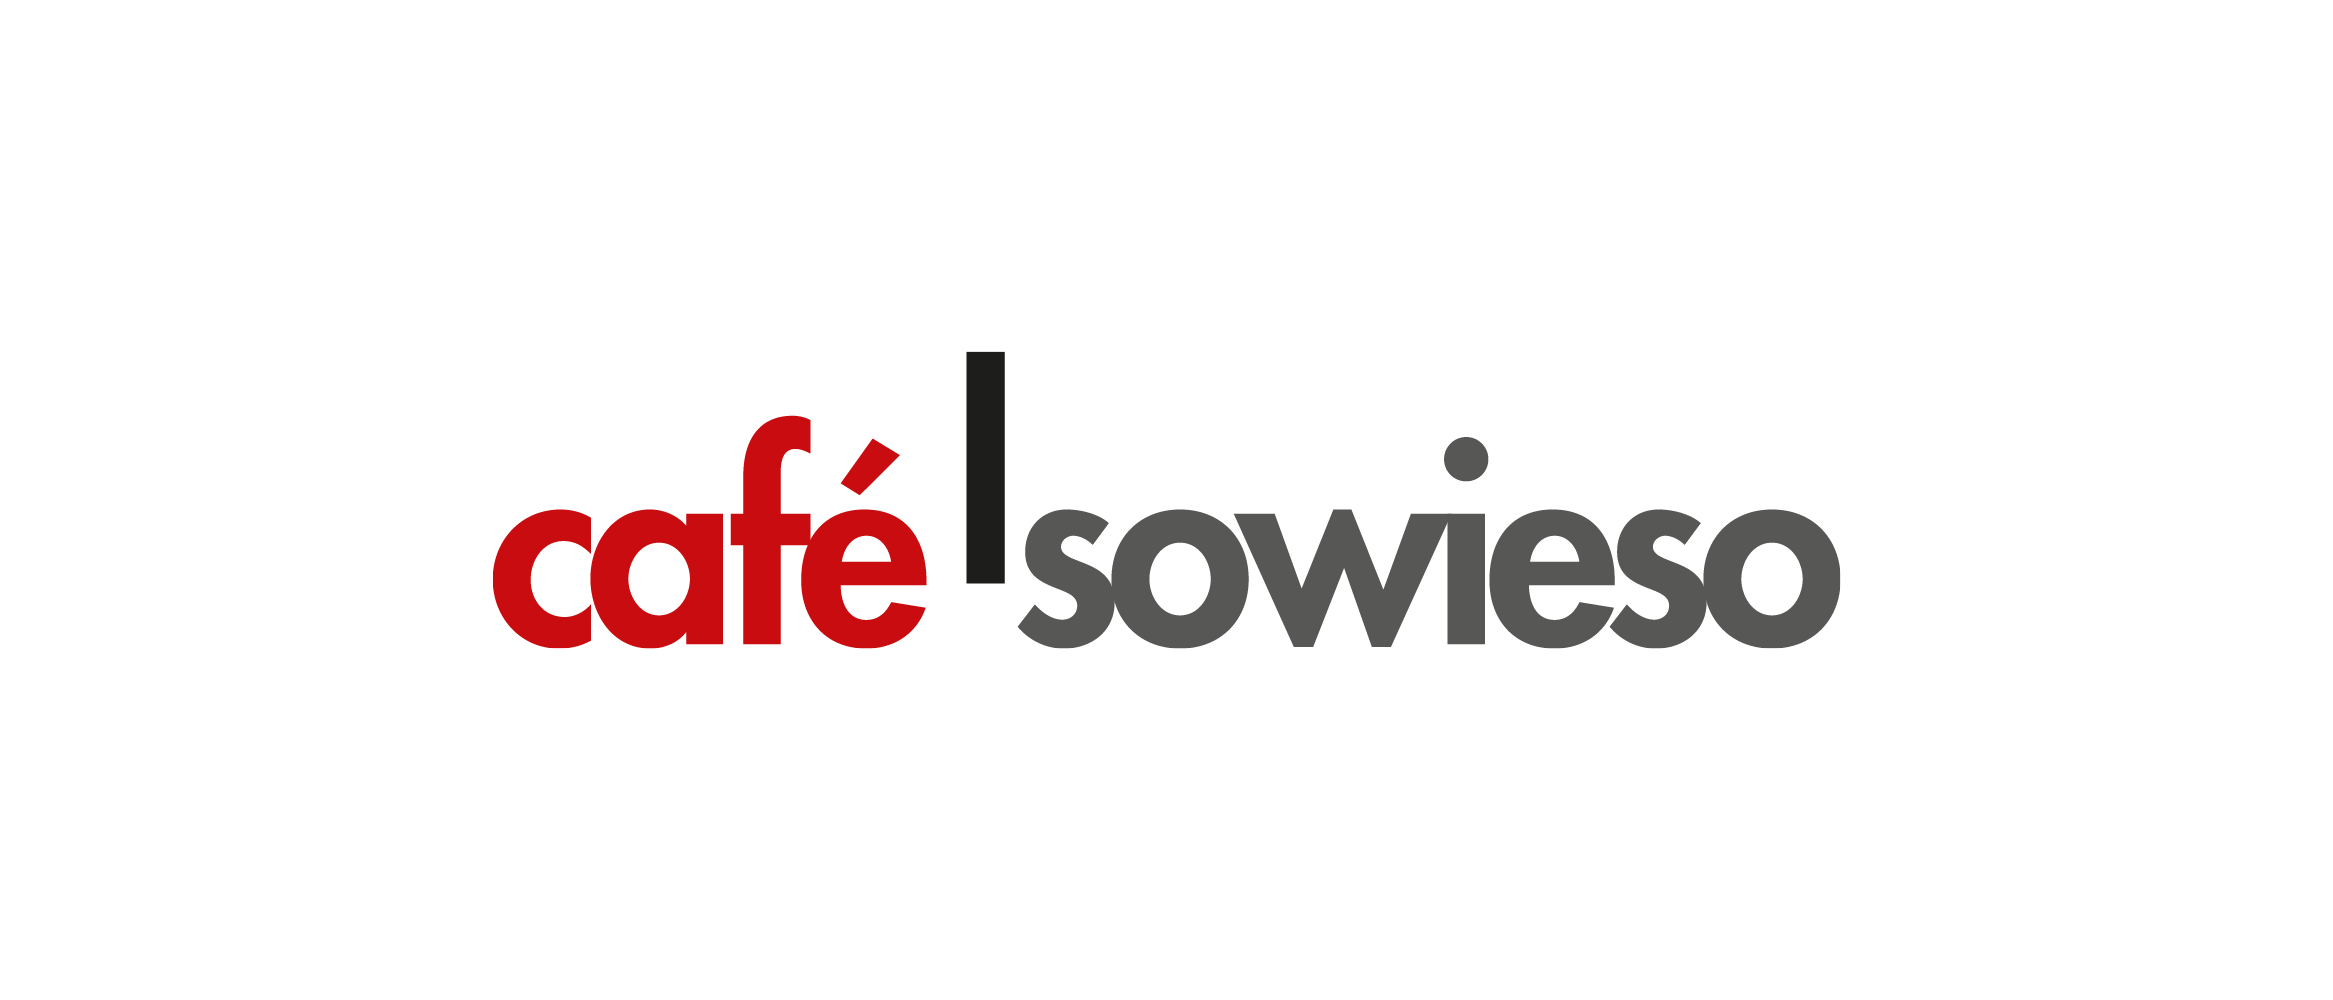 Stiftung café sowieso